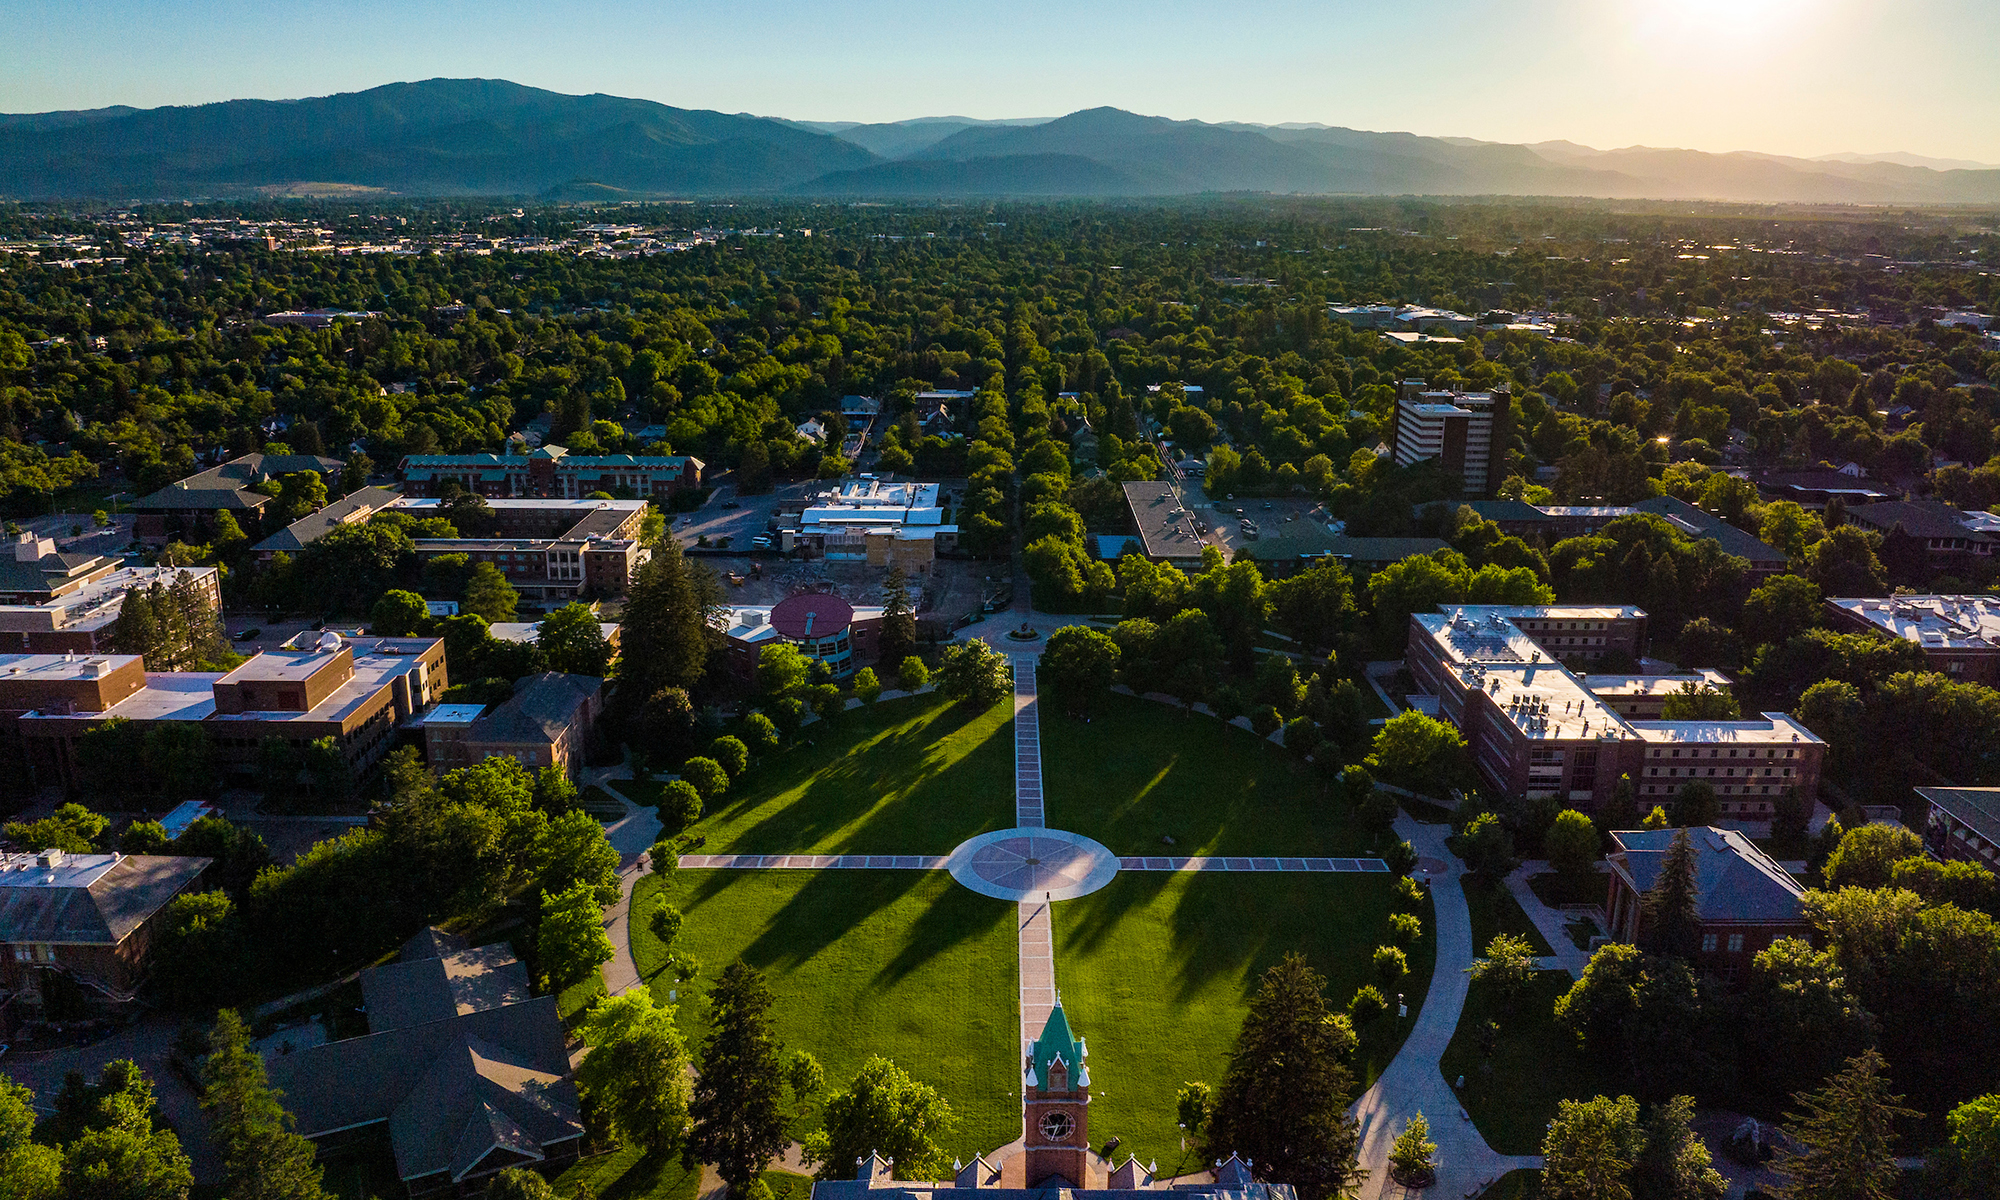 Shadows fall across the UM campus, as seen from a drone in the sky